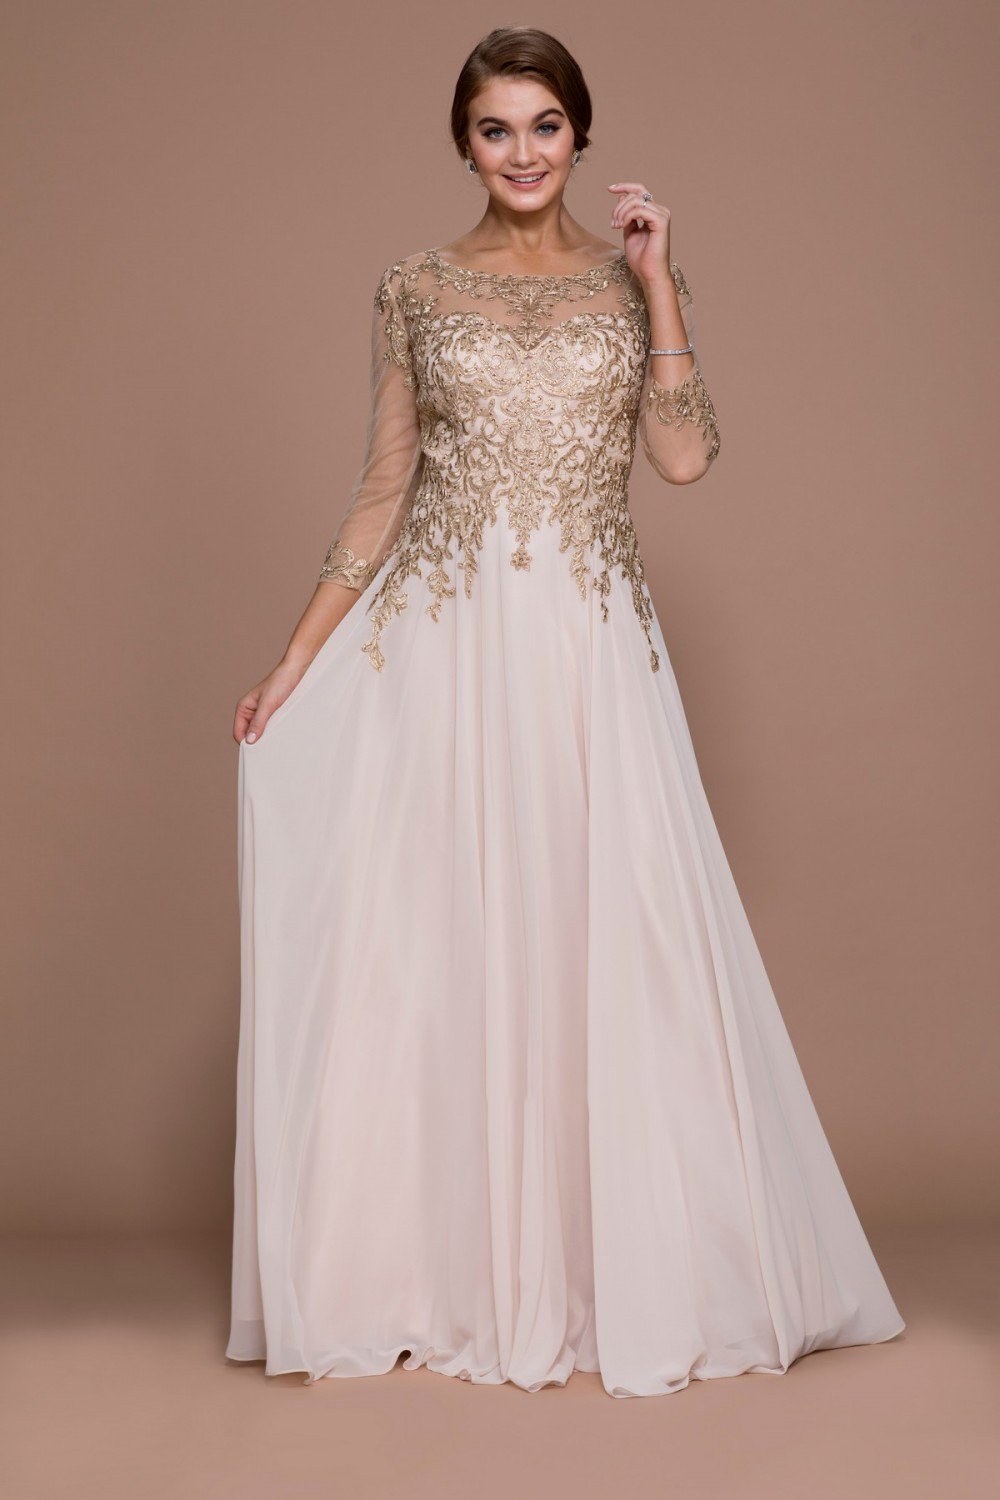 Nox Anabel - Illusion Appliqued A-Line Long Dress J501 In Gold